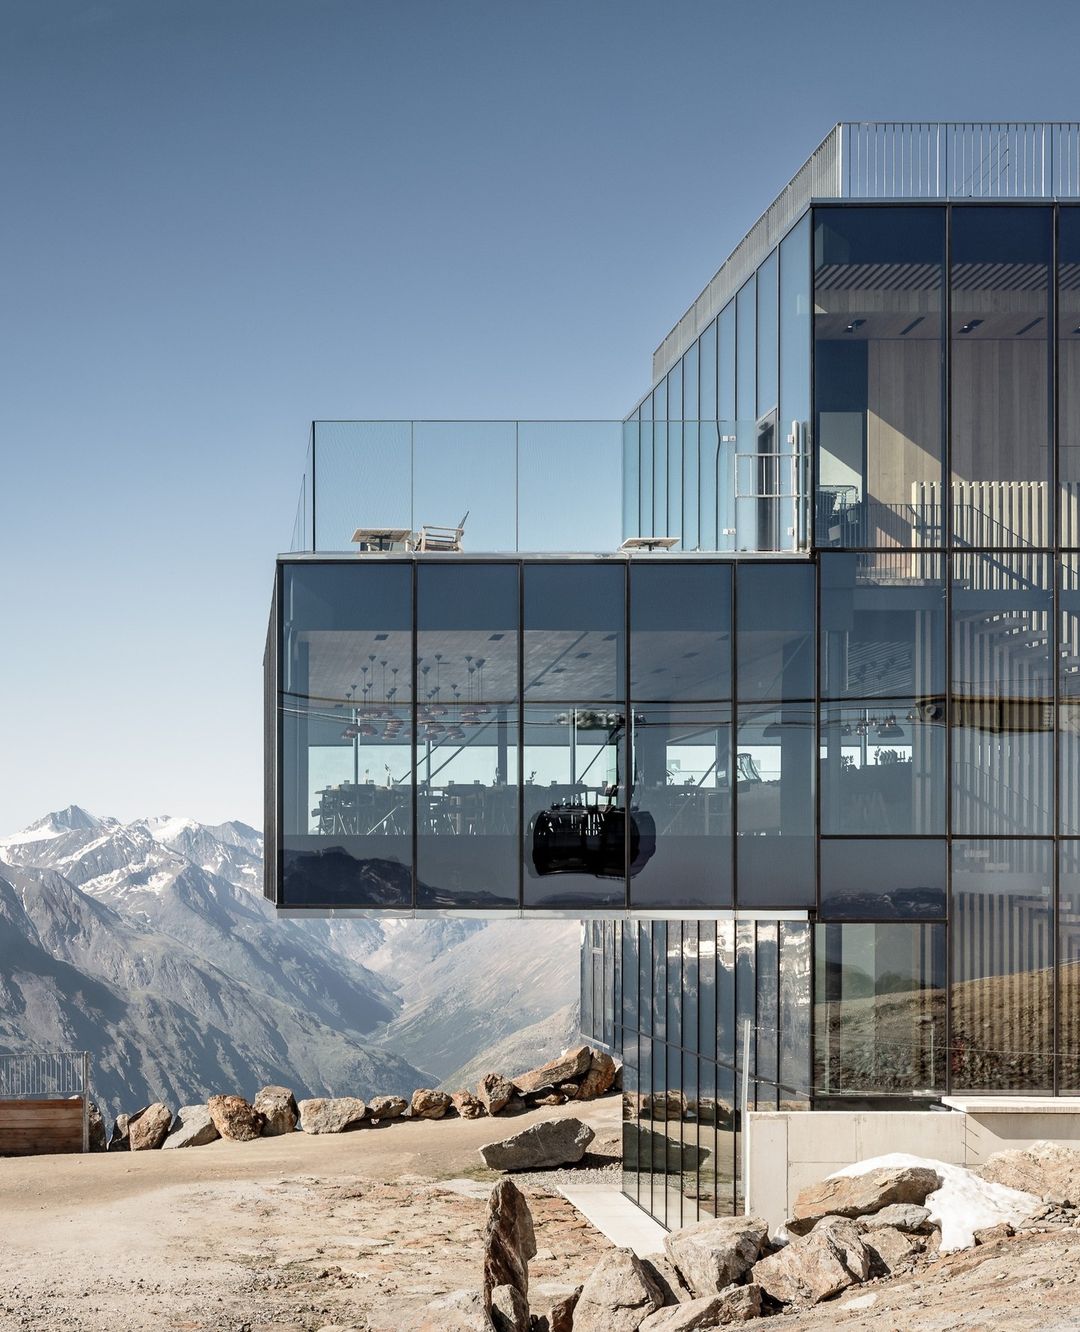 A James Bond experience world and a unique lunch spot above the clouds at ice Q Restaurant